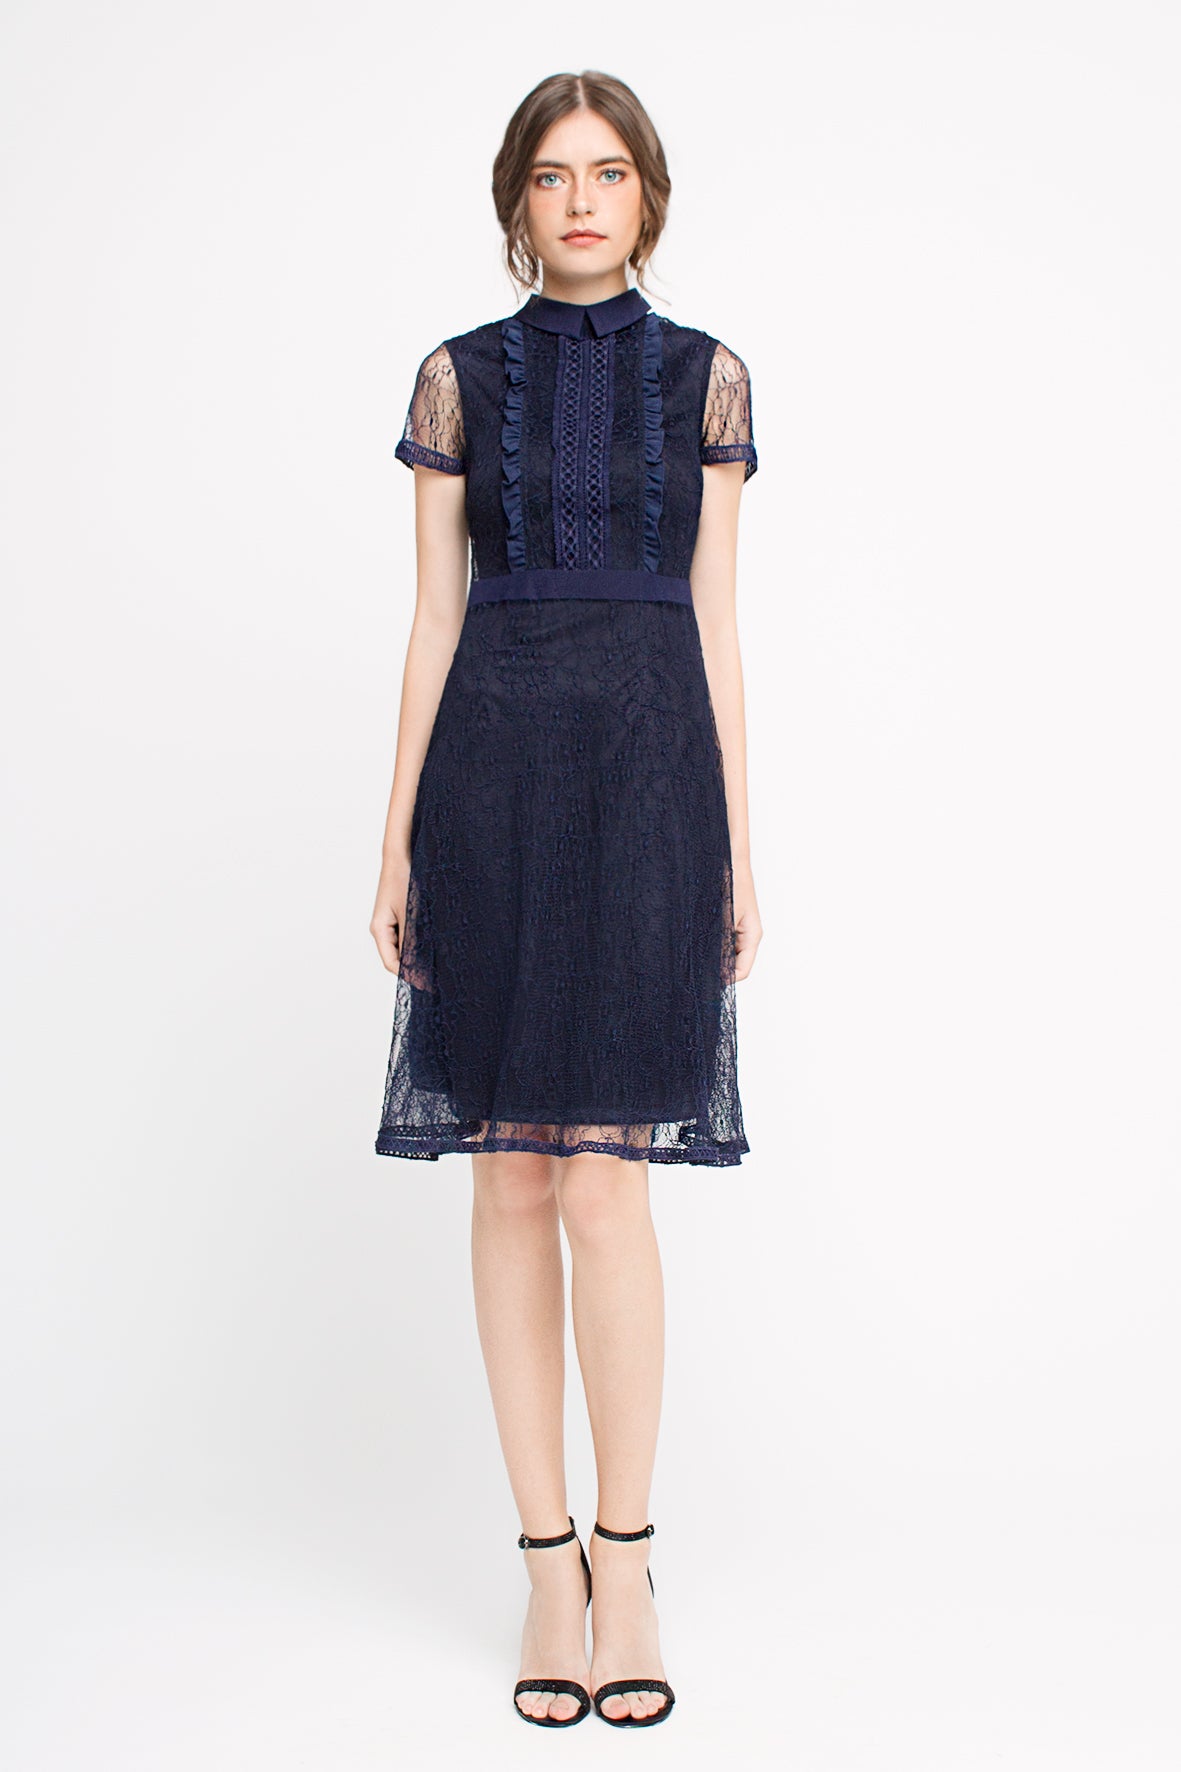 Lace Collared Dress – Half Phase